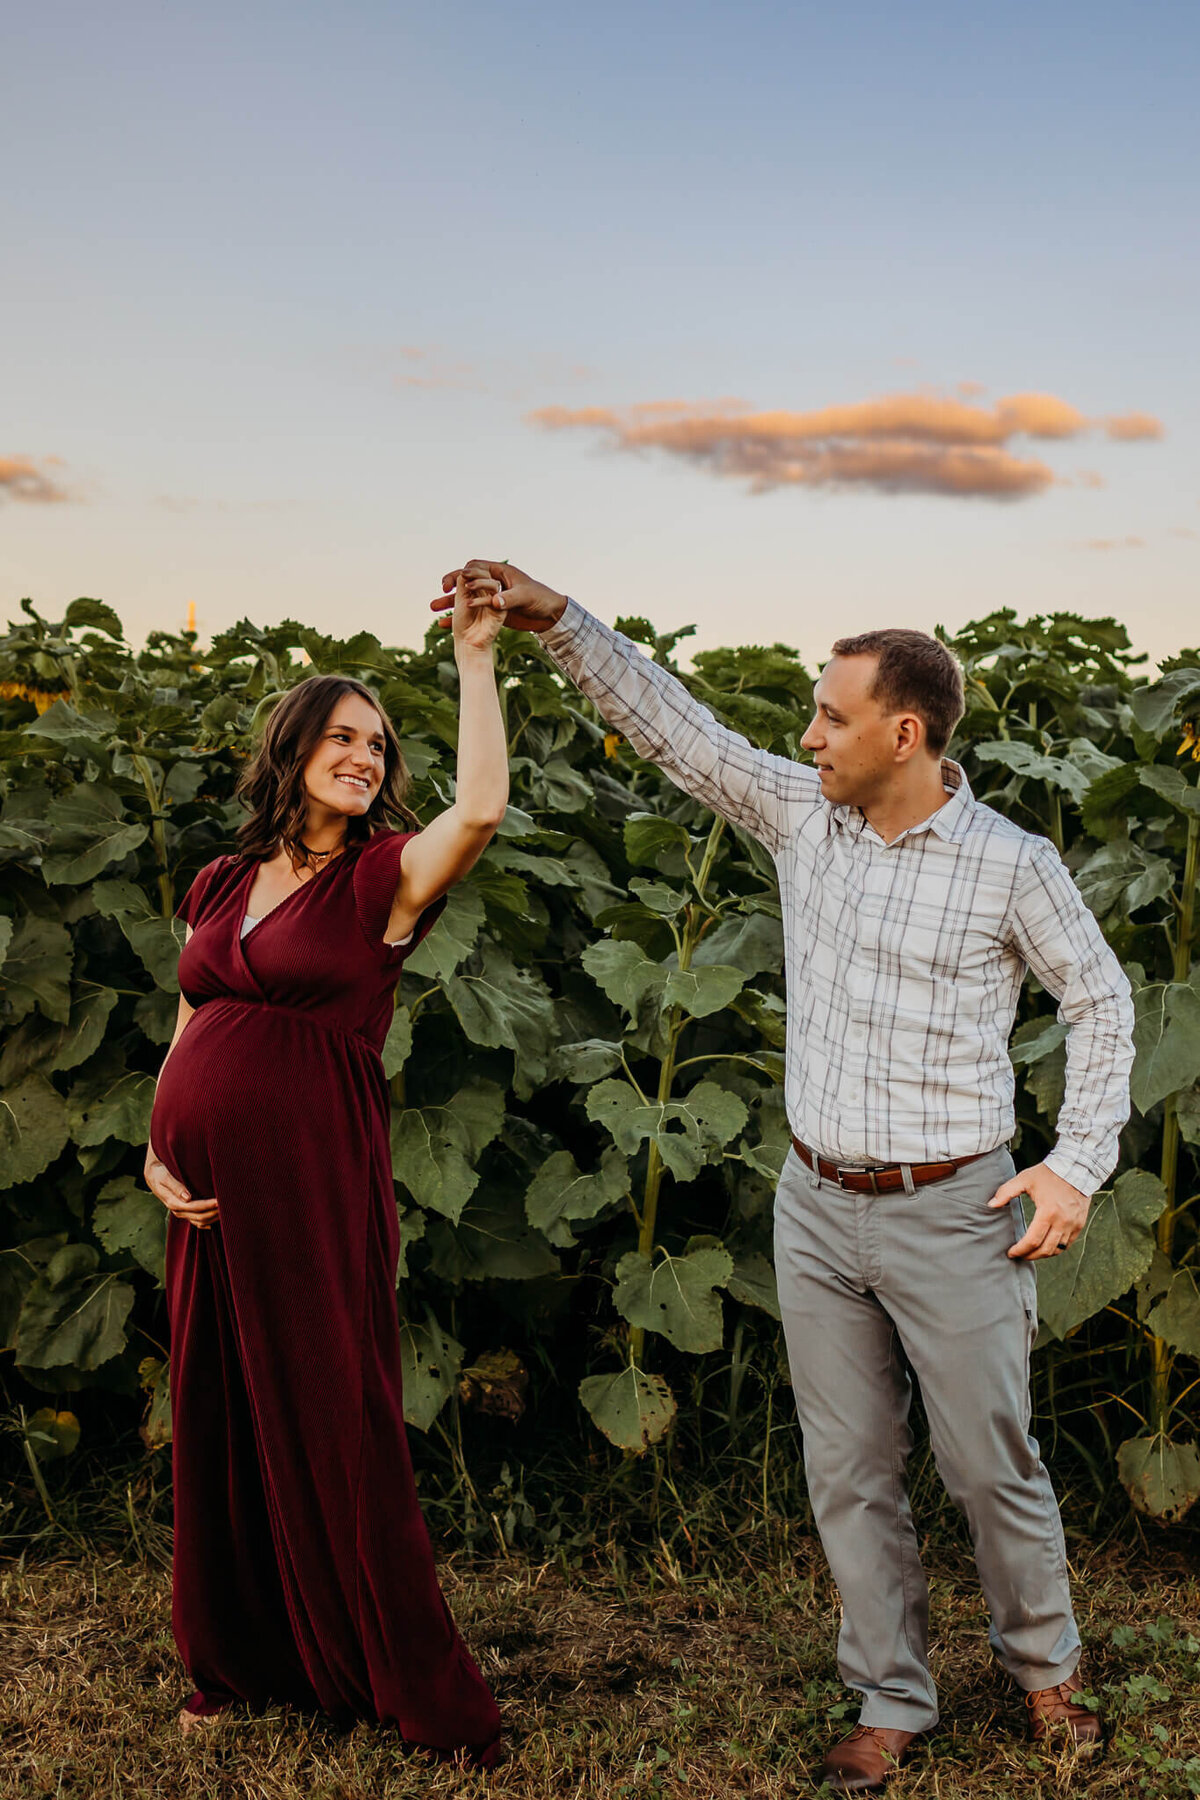 baby bump dancing in field for maternity pictures